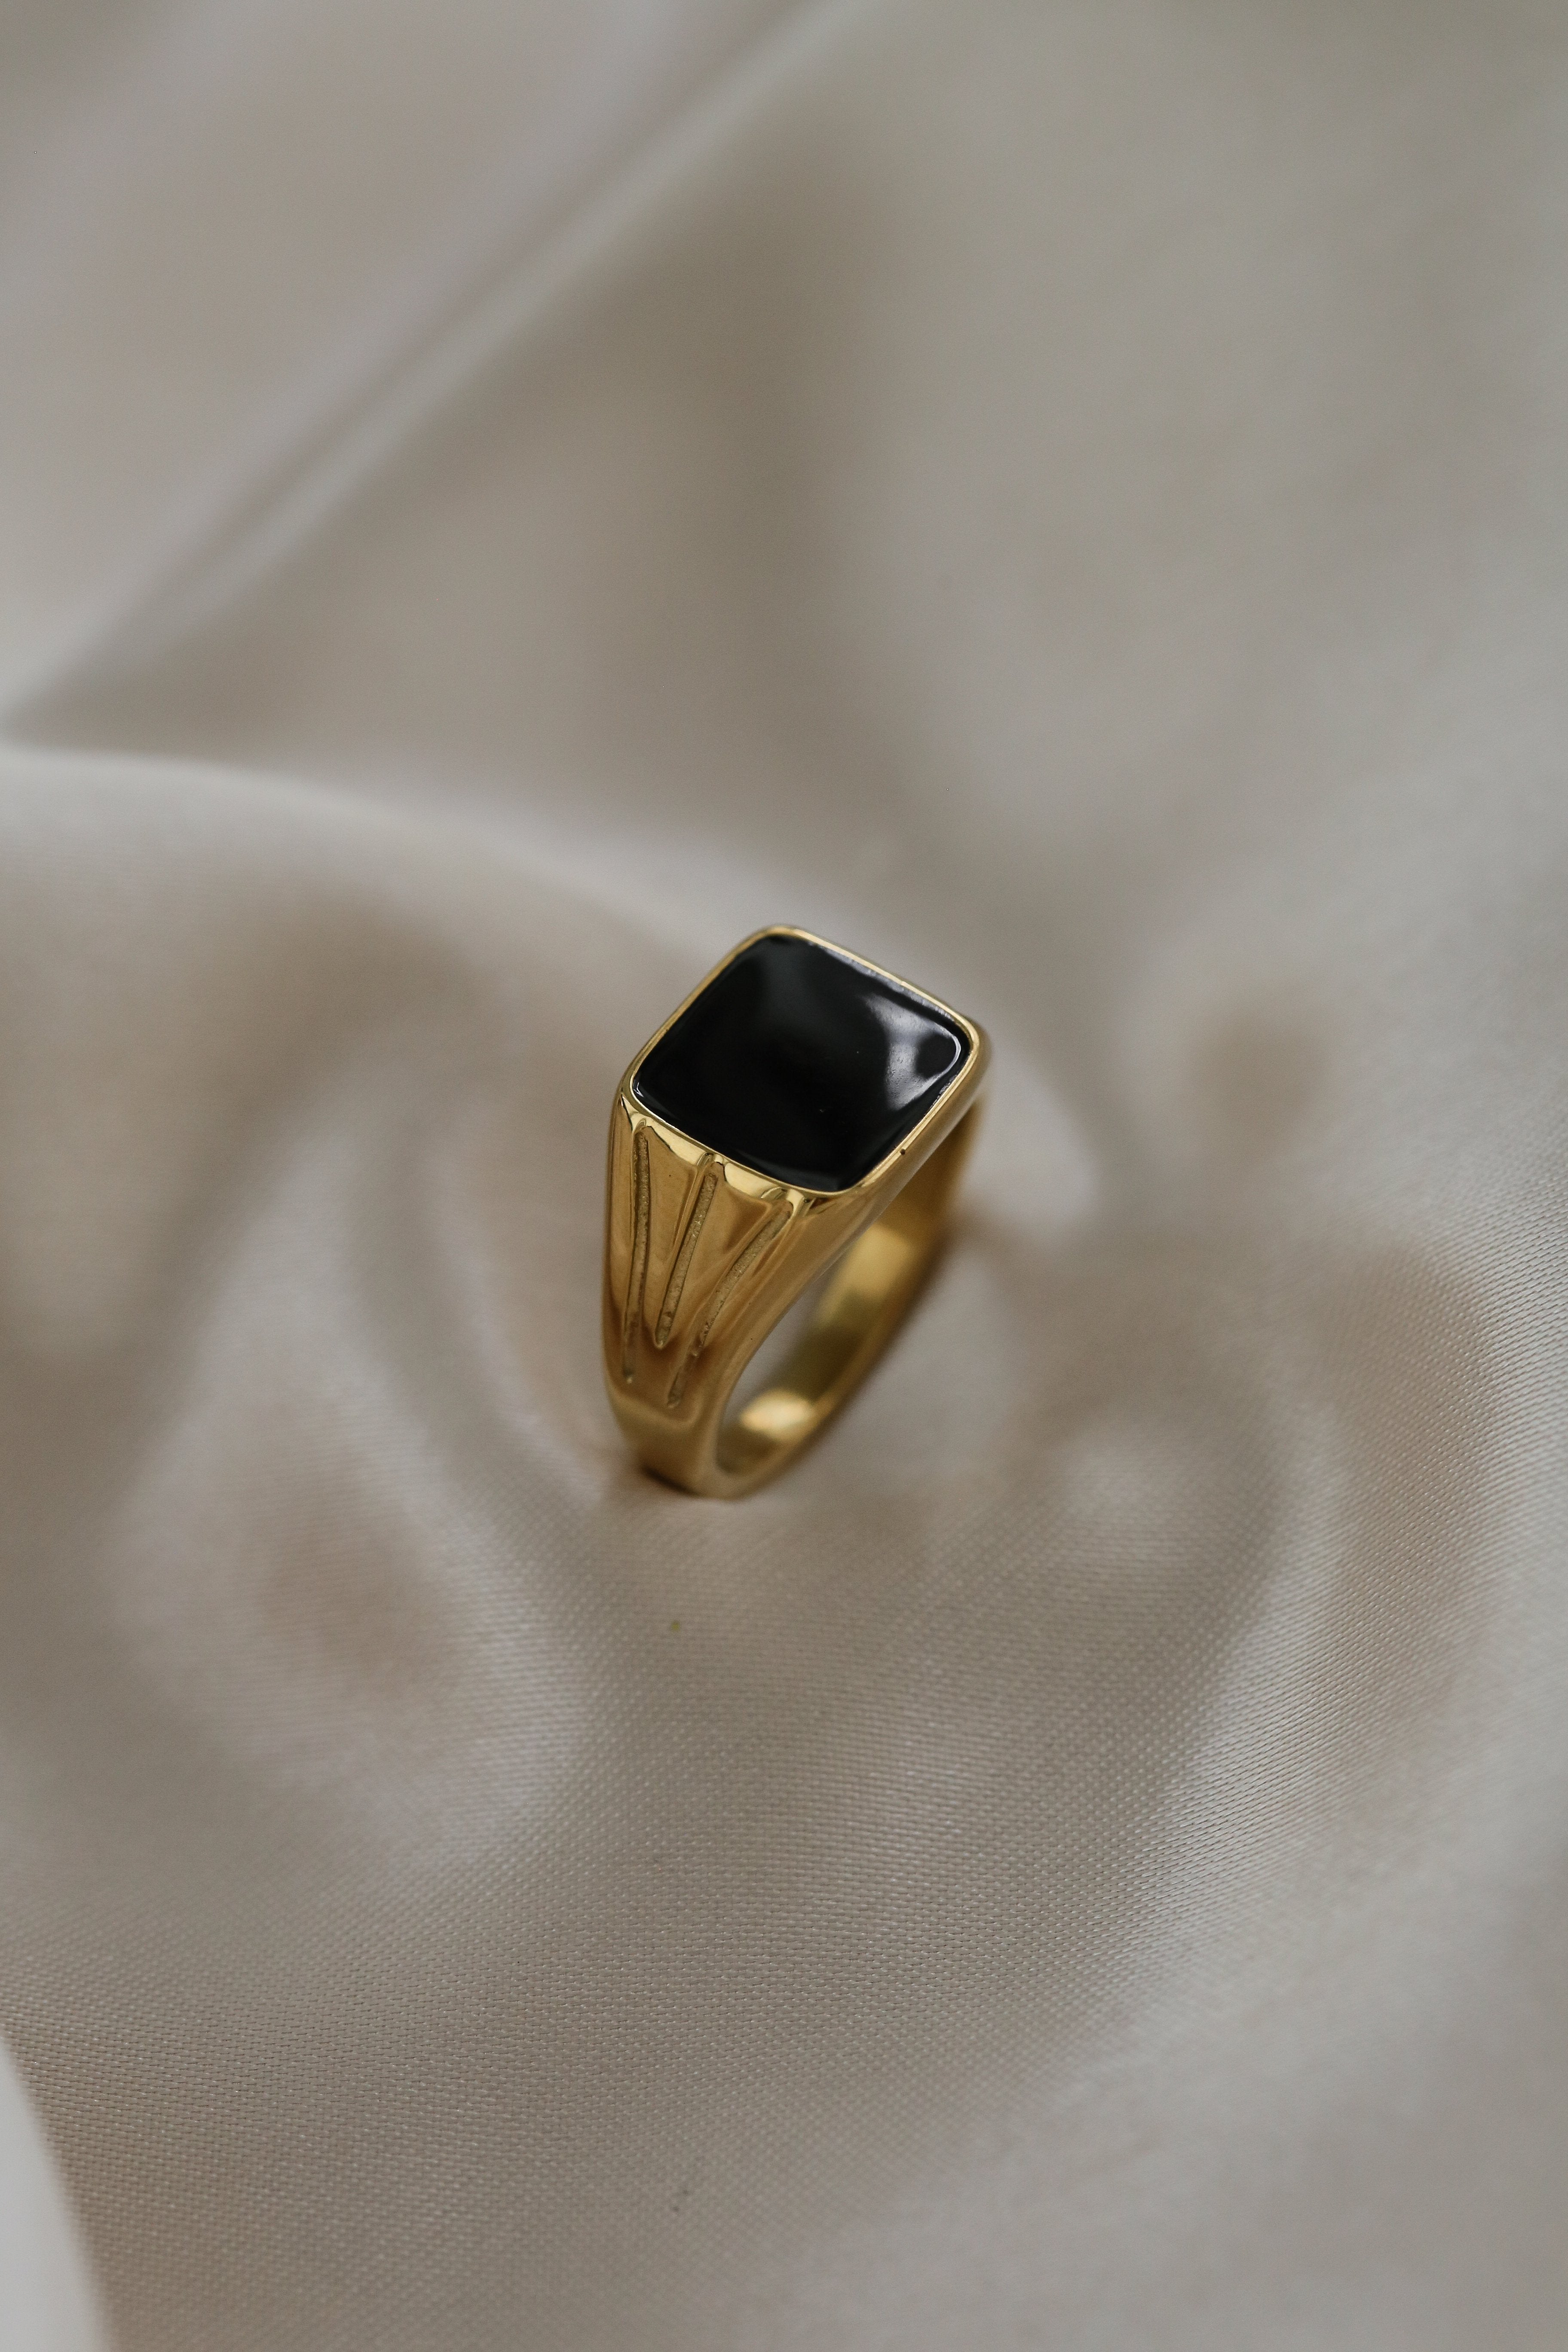 Enrica Ring - Boutique Minimaliste has waterproof, durable, elegant and vintage inspired jewelry